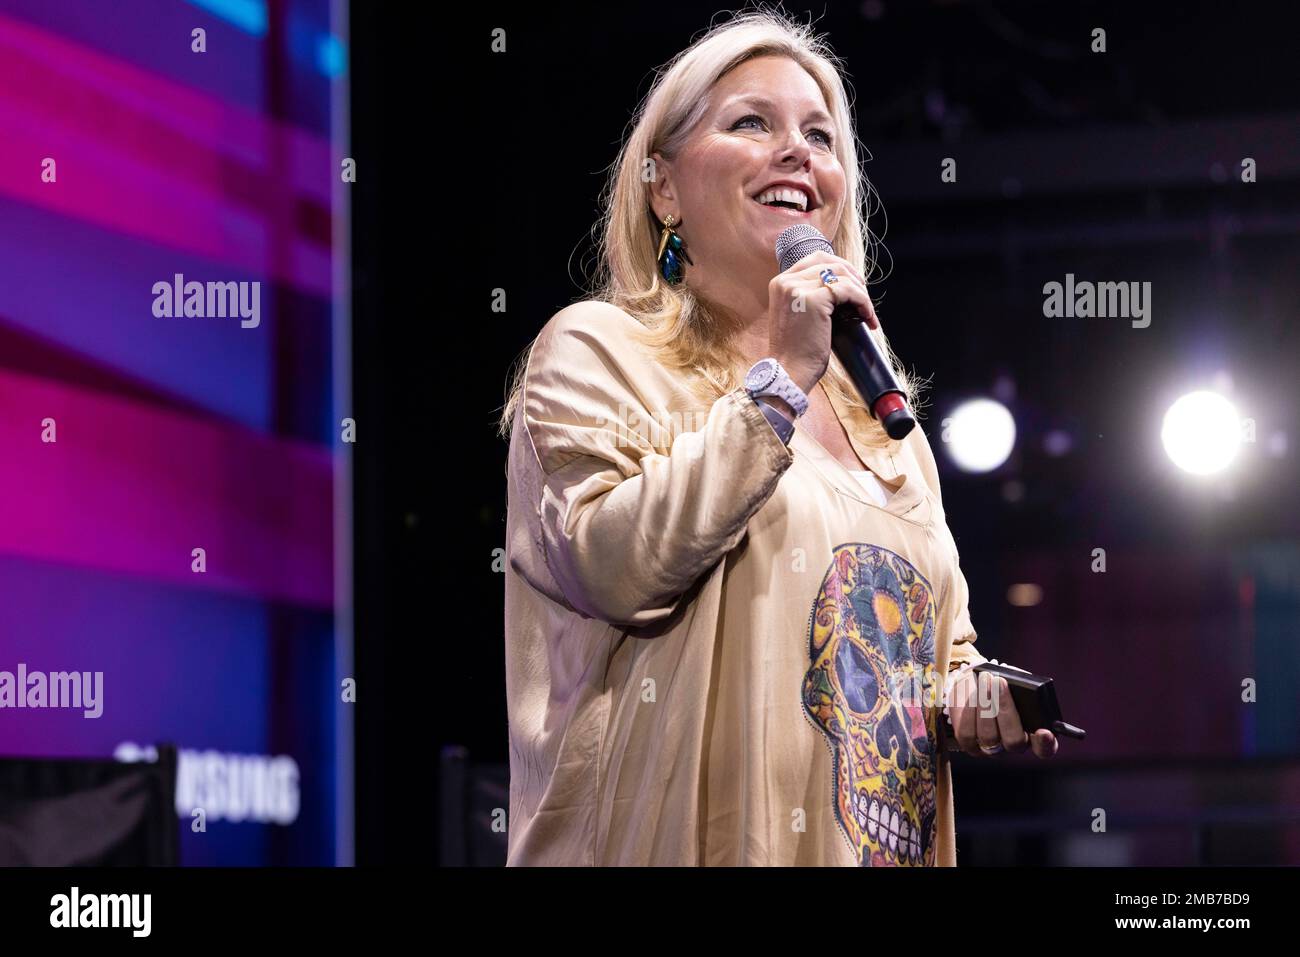 https://c8.alamy.com/comp/2MB7BD9/image-distributed-for-for-samsung-electronics-america-michelle-crossan-matos-chief-marketing-officer-of-samsung-electronics-america-talks-about-the-companys-efforts-to-celebrate-nft-creators-and-cultivate-communities-in-the-metaverse-at-samsung-837next-event-series-during-nftnyc-on-wednesday-june-22-2022-in-new-york-ann-sophie-fjello-jensenap-images-for-samsung-electronics-america-2MB7BD9.jpg